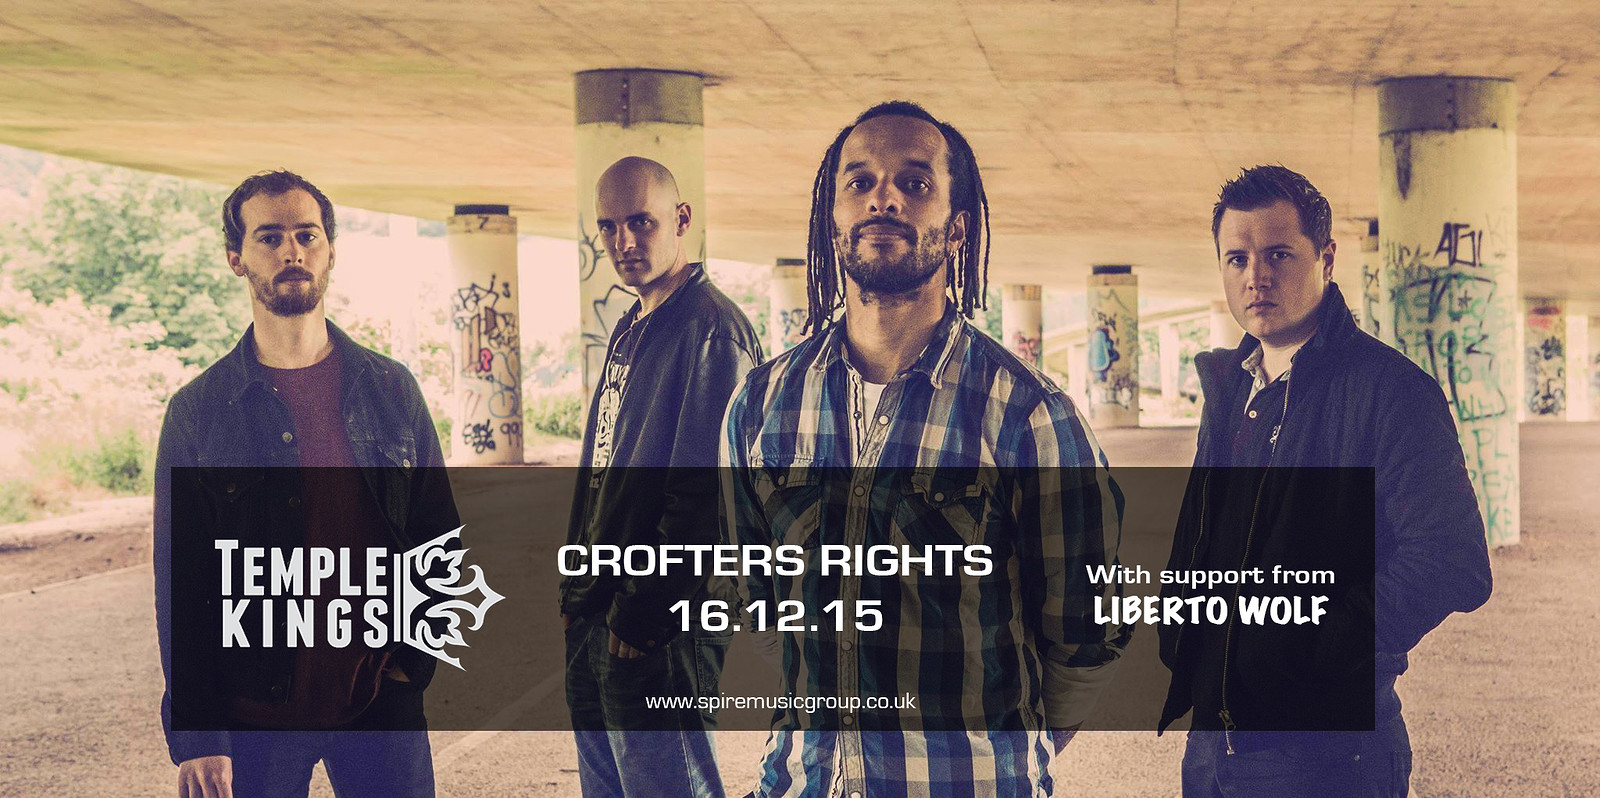 Temple Kings + Liberto Wolf at Crofters Rights